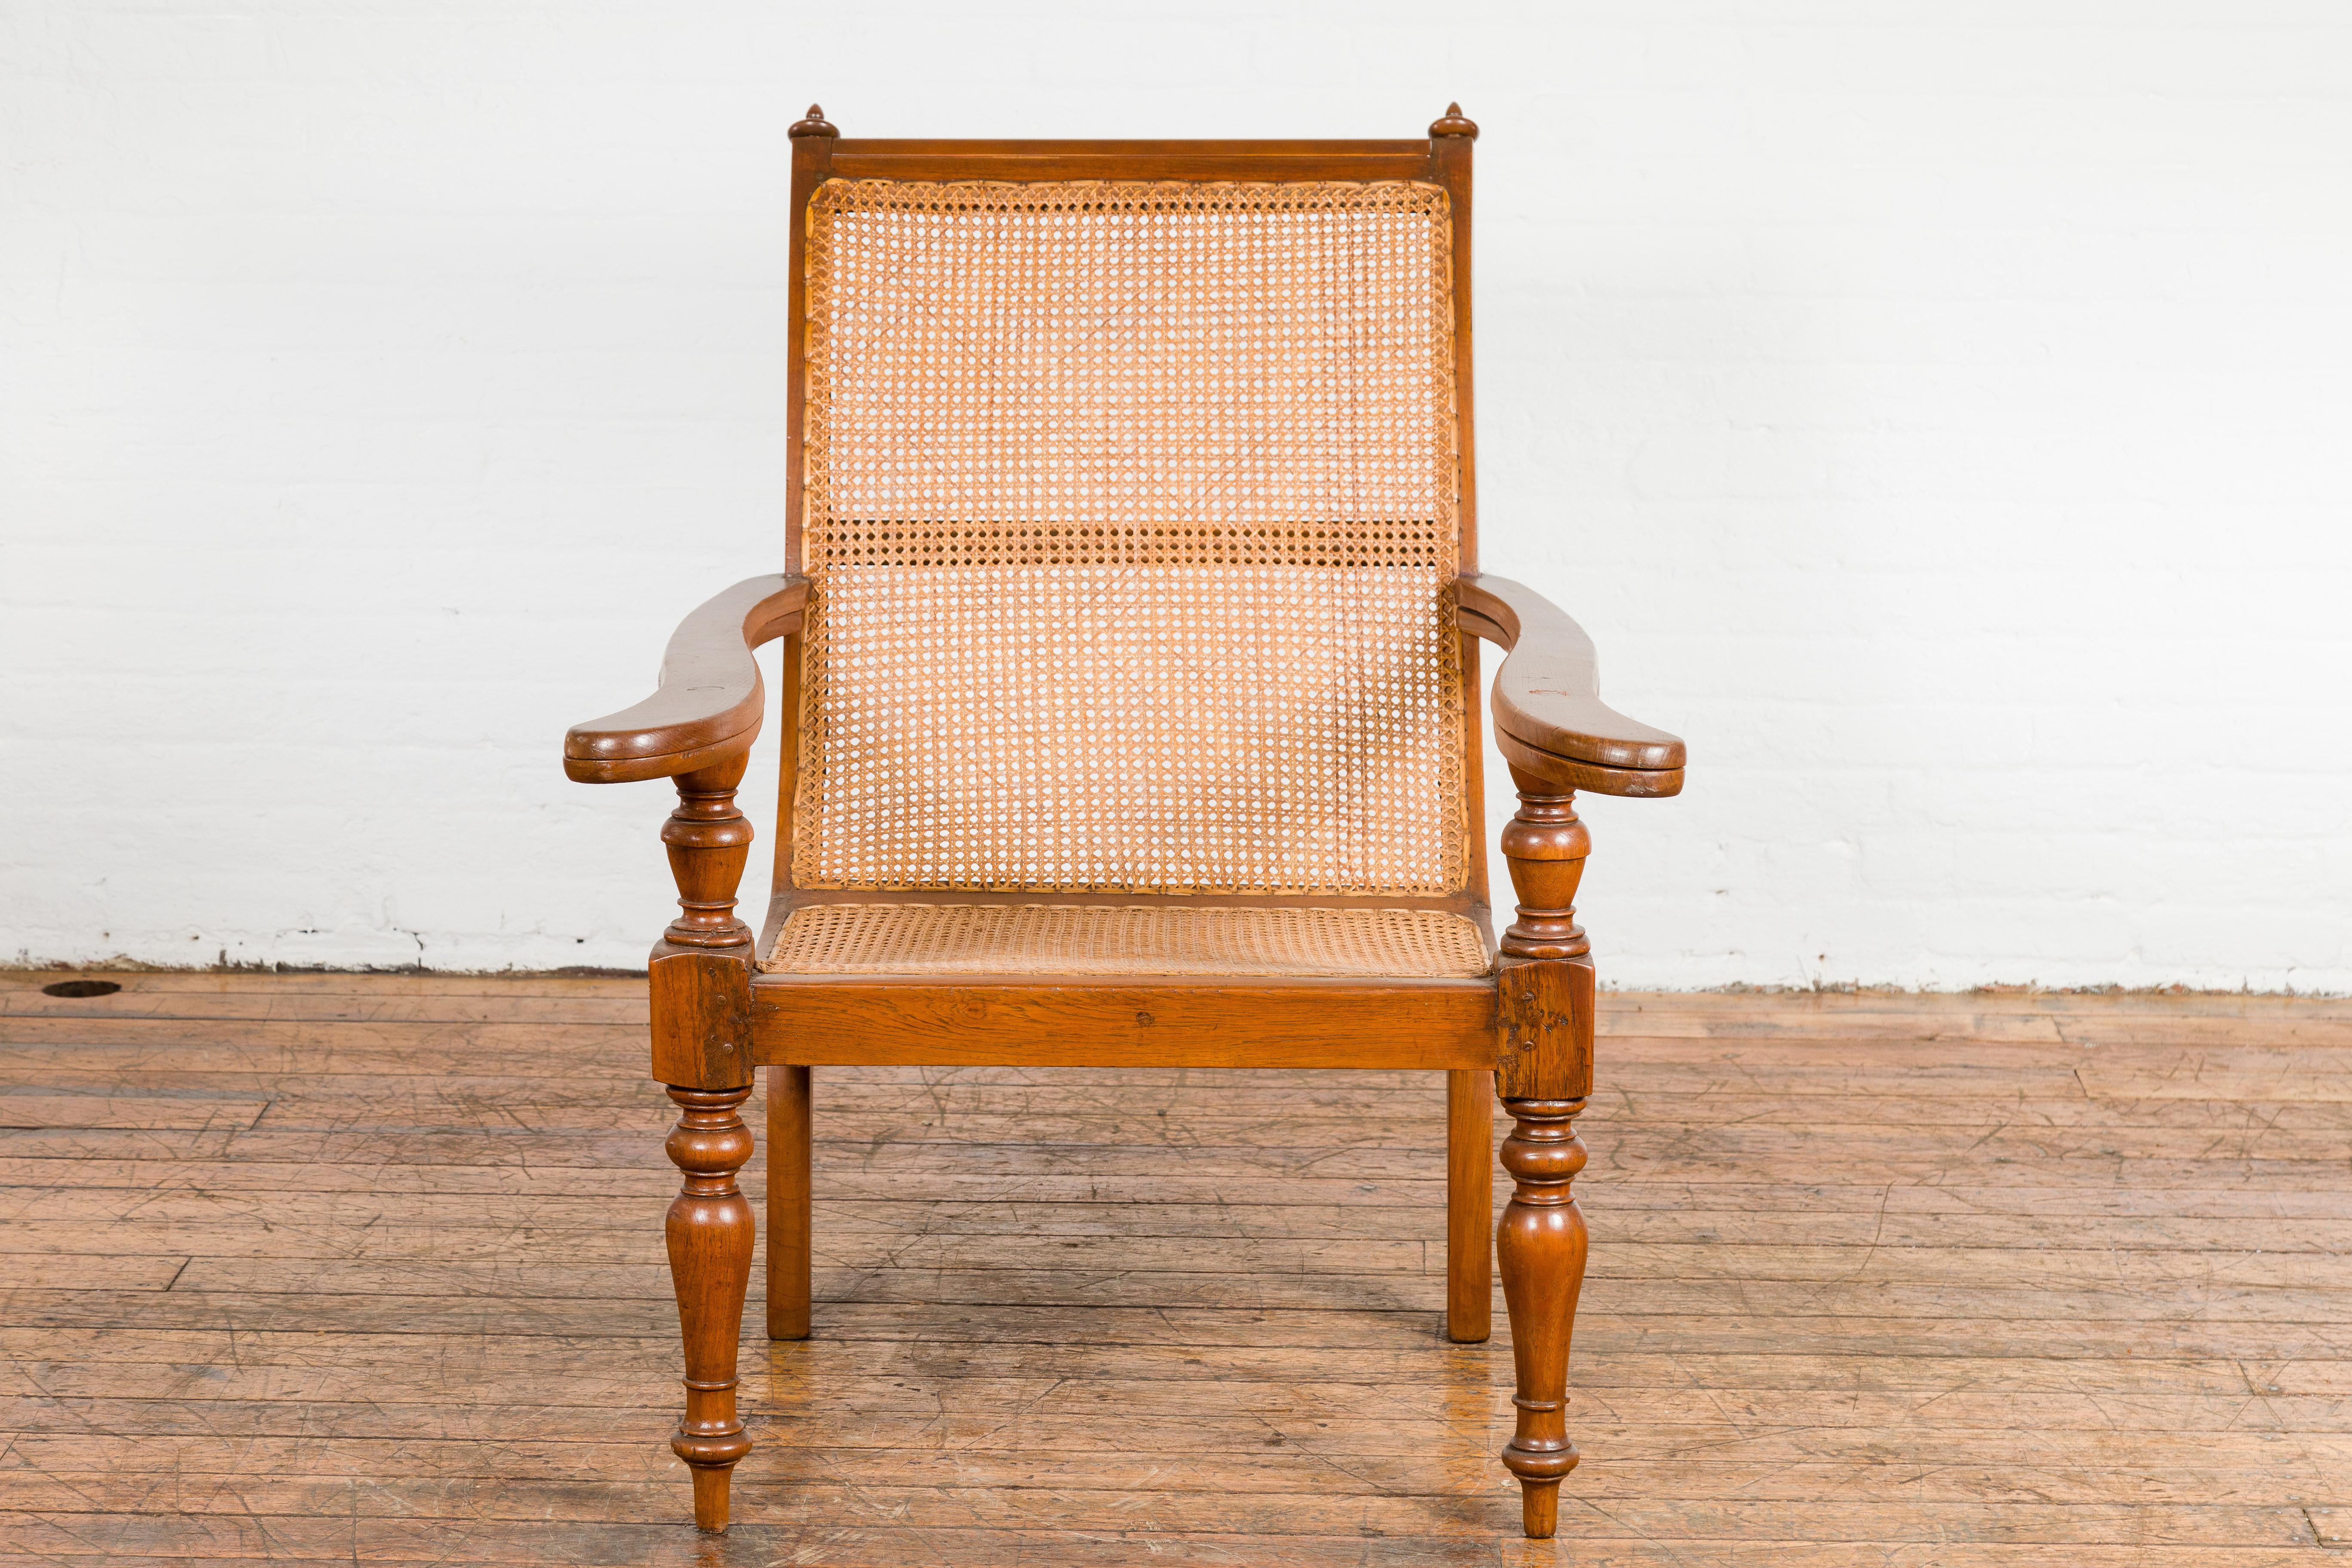 A Dutch Colonial period wood and rattan lounge plantation chair with slanted, curving back, extending arms and petite turned finials. Introducing a stunning piece of history, this Dutch Colonial period wood and rattan lounge plantation chair